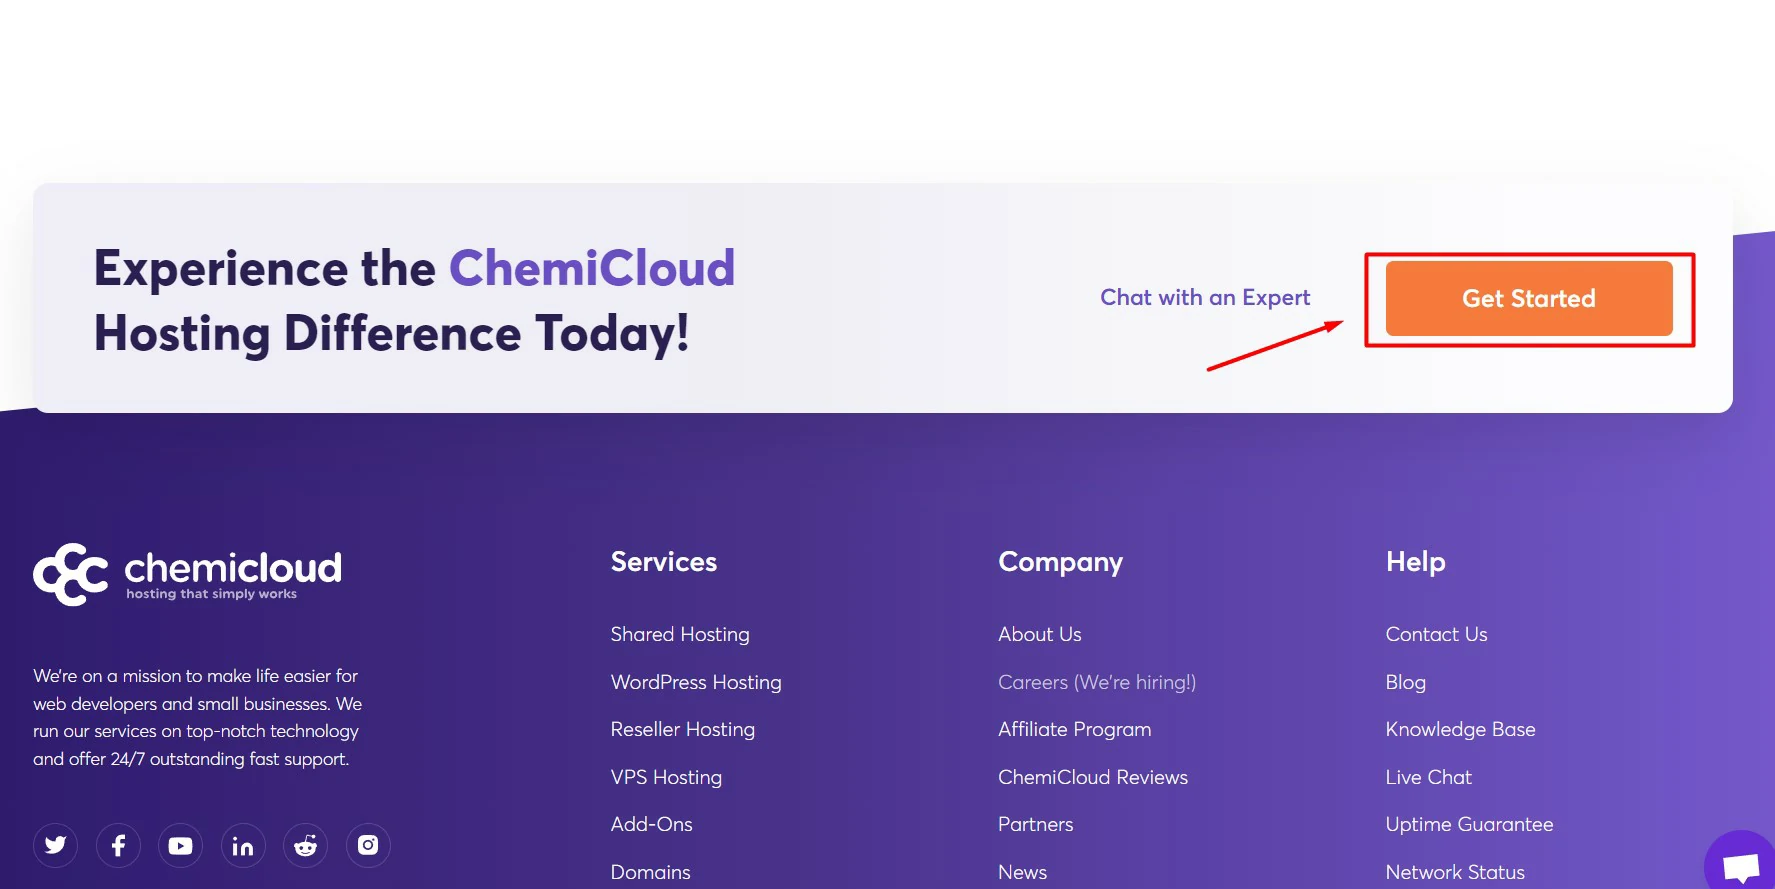 Getting started with chemicloud